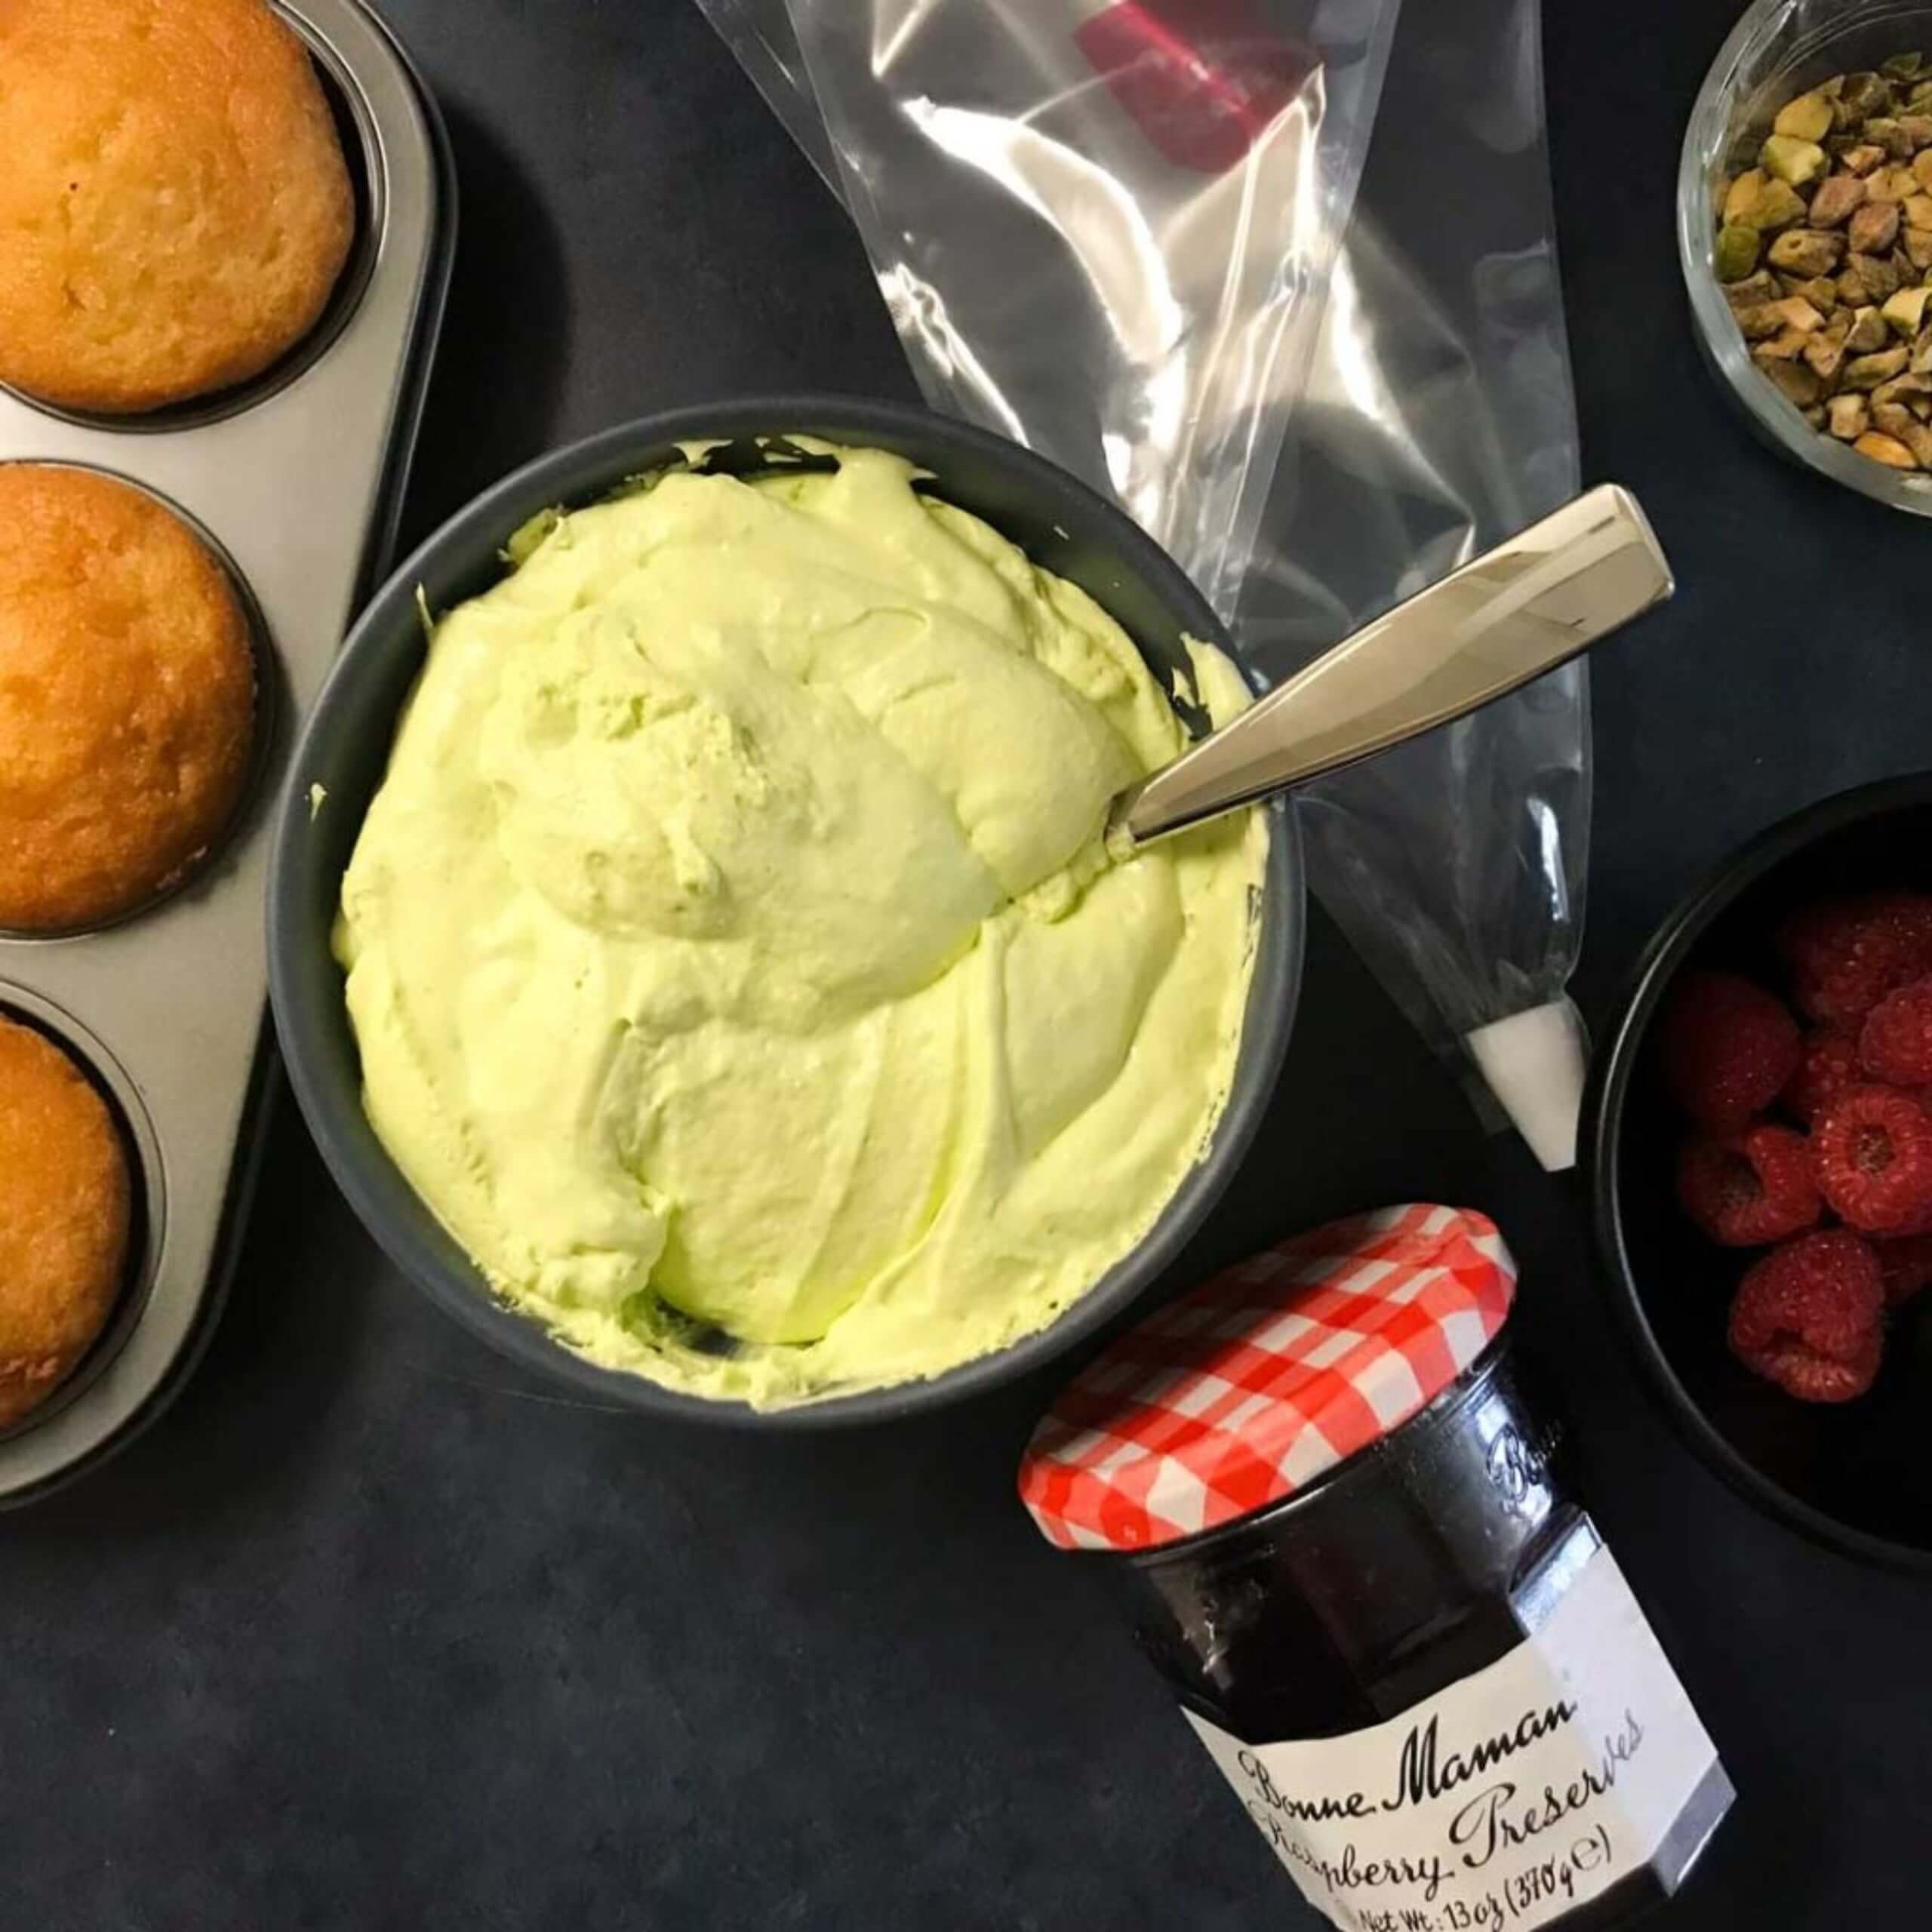 Vanilla Cupcakes with Raspberry Filling and Pistachio Whipped Cream | My Curated Tastes